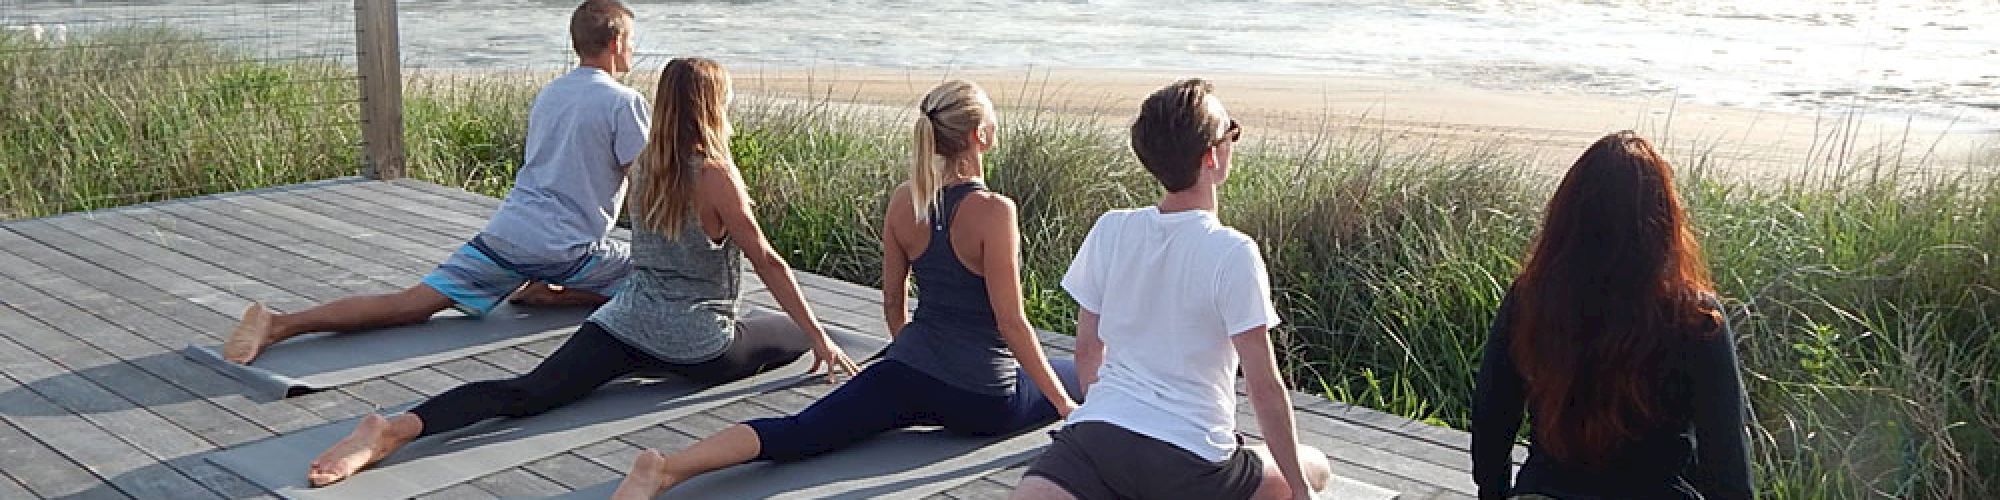 A group of five people practicing yoga on mats by the ocean, enjoying a scenic, serene view of the sea and sky, on a wooden deck.